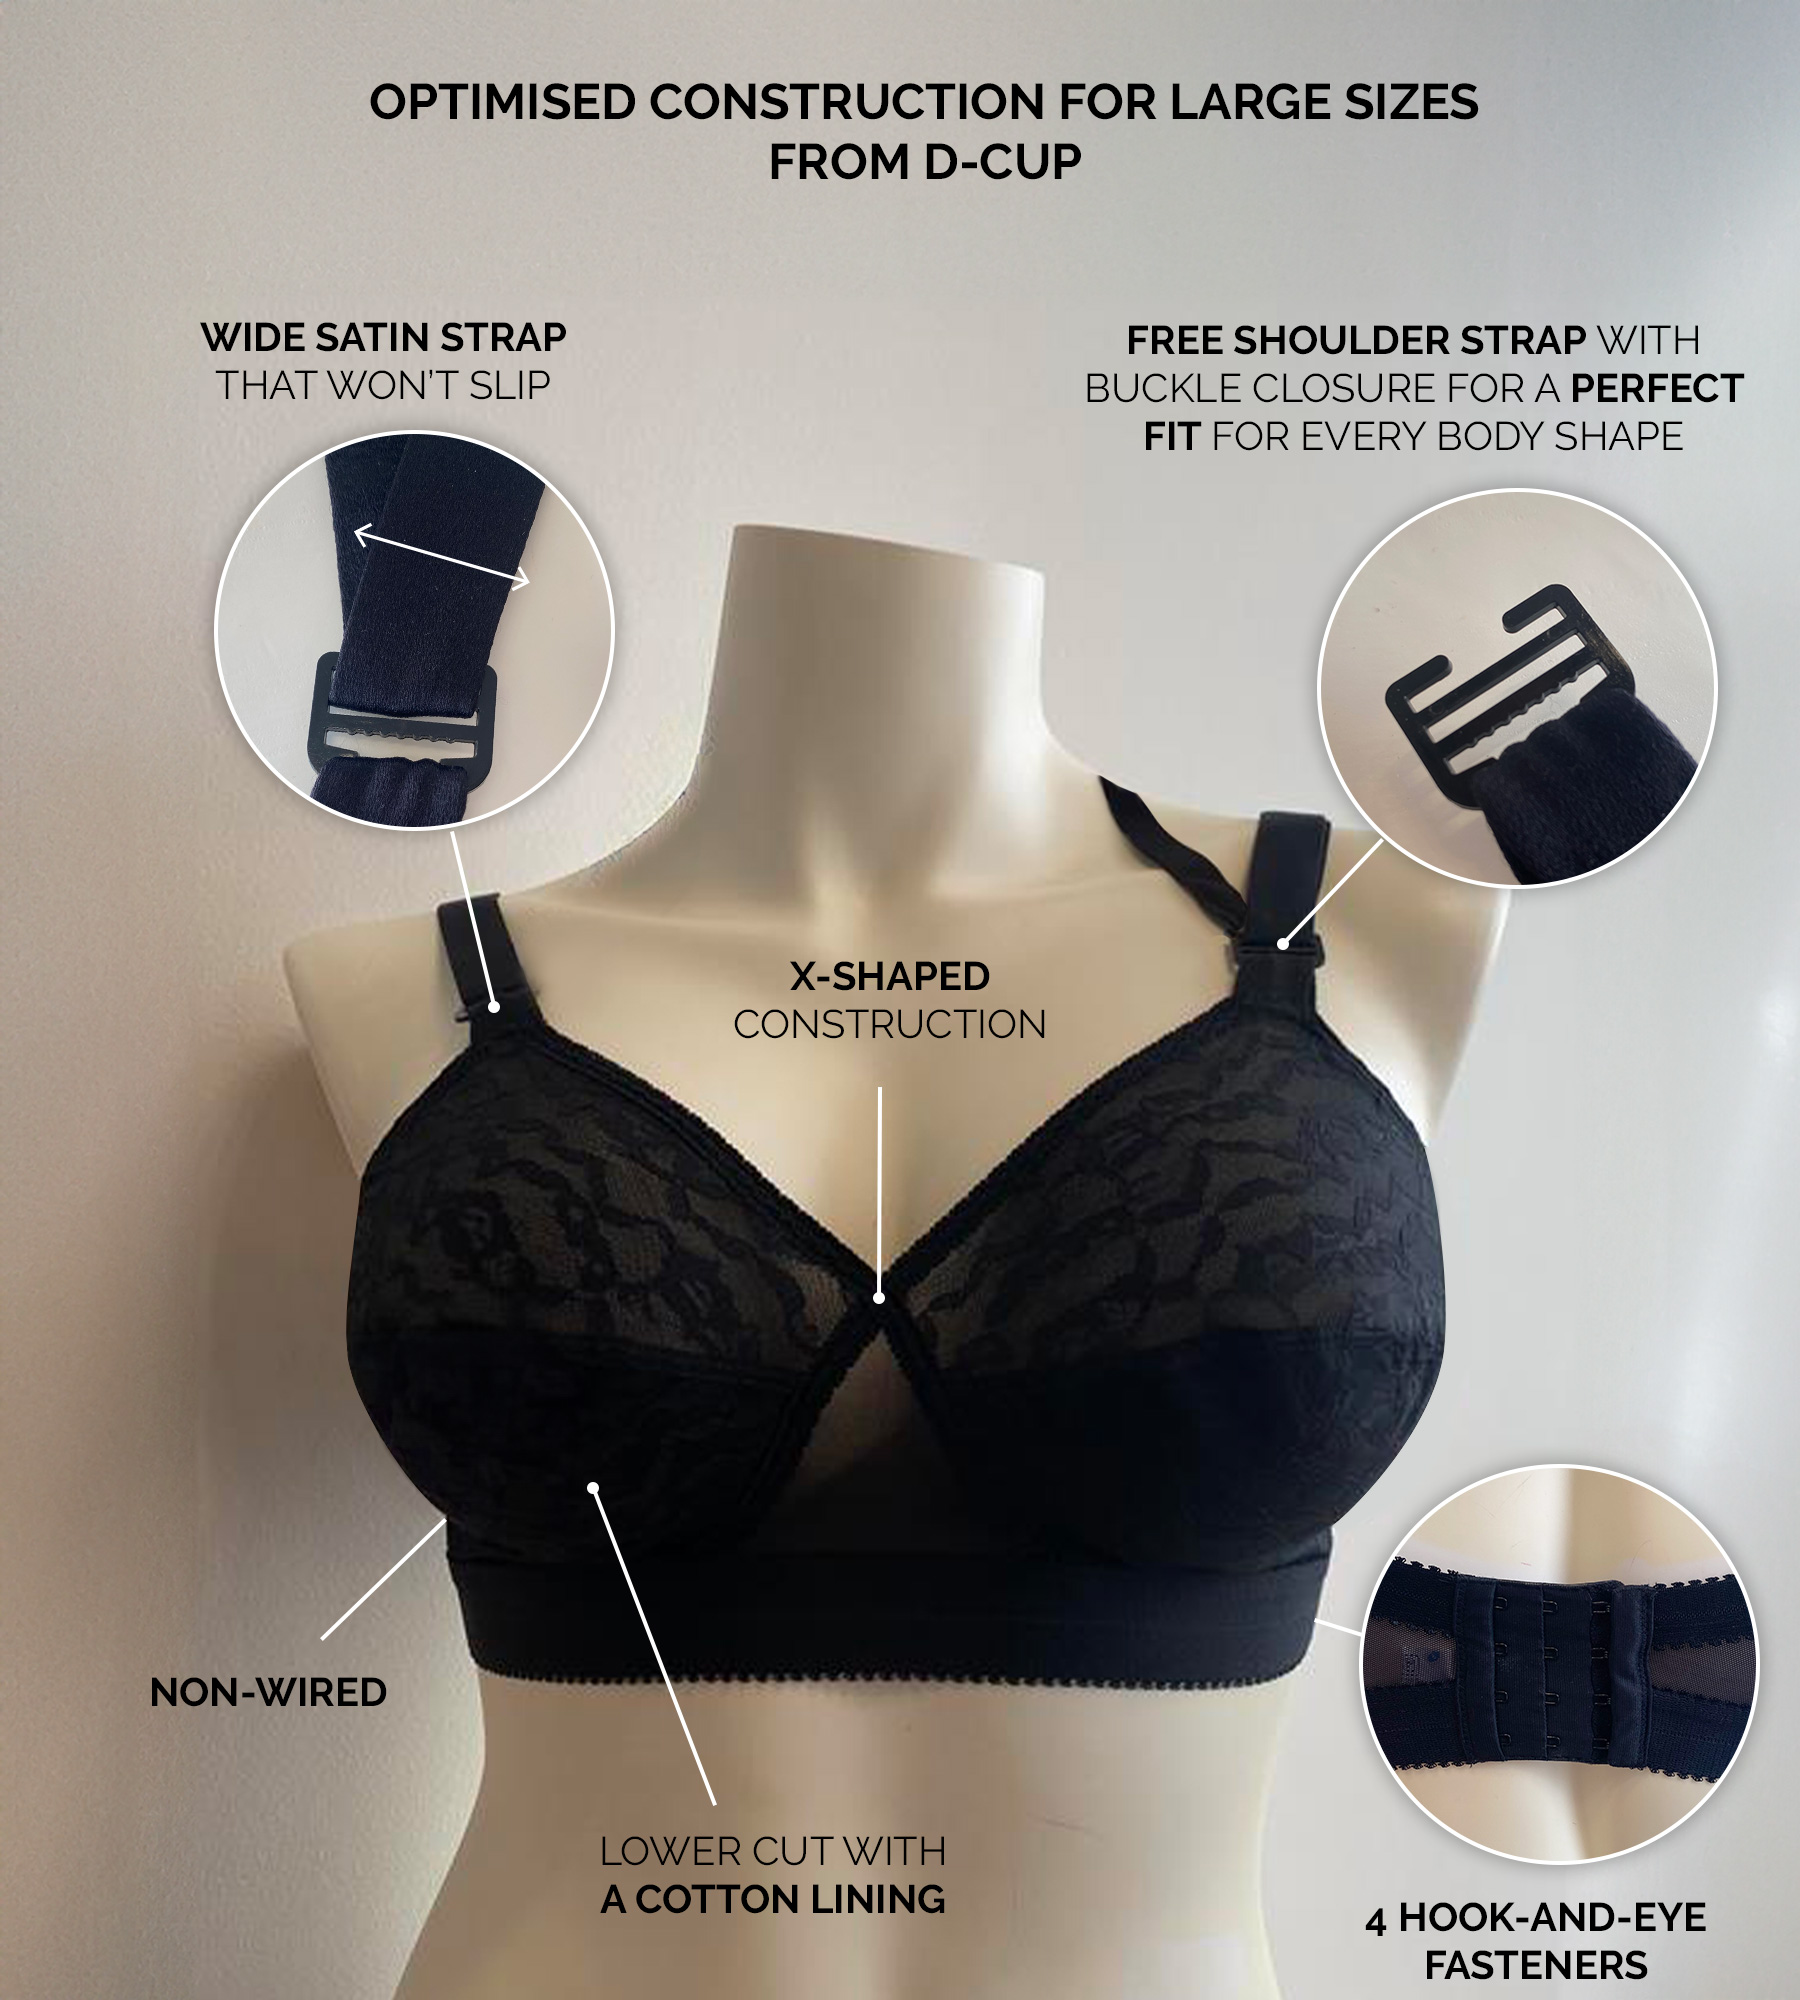 Non-wired Bra in Black – Cross Your Heart 165